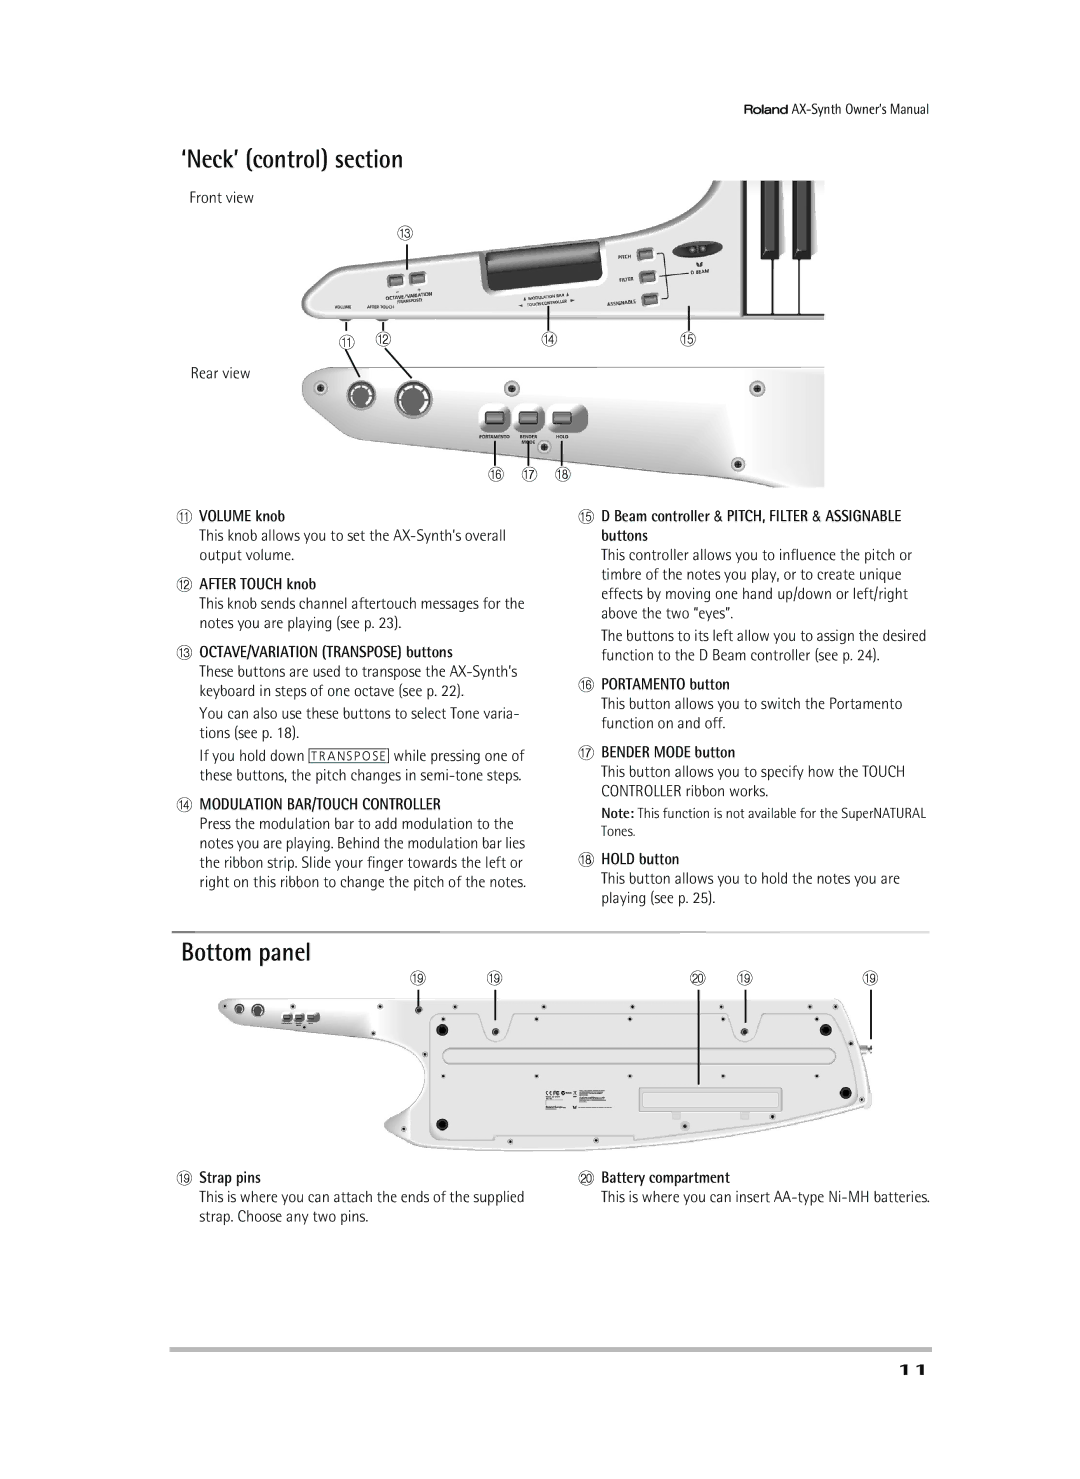 Roland AX-Synth owner manual ‘Neck’ control section, Bottom panel 